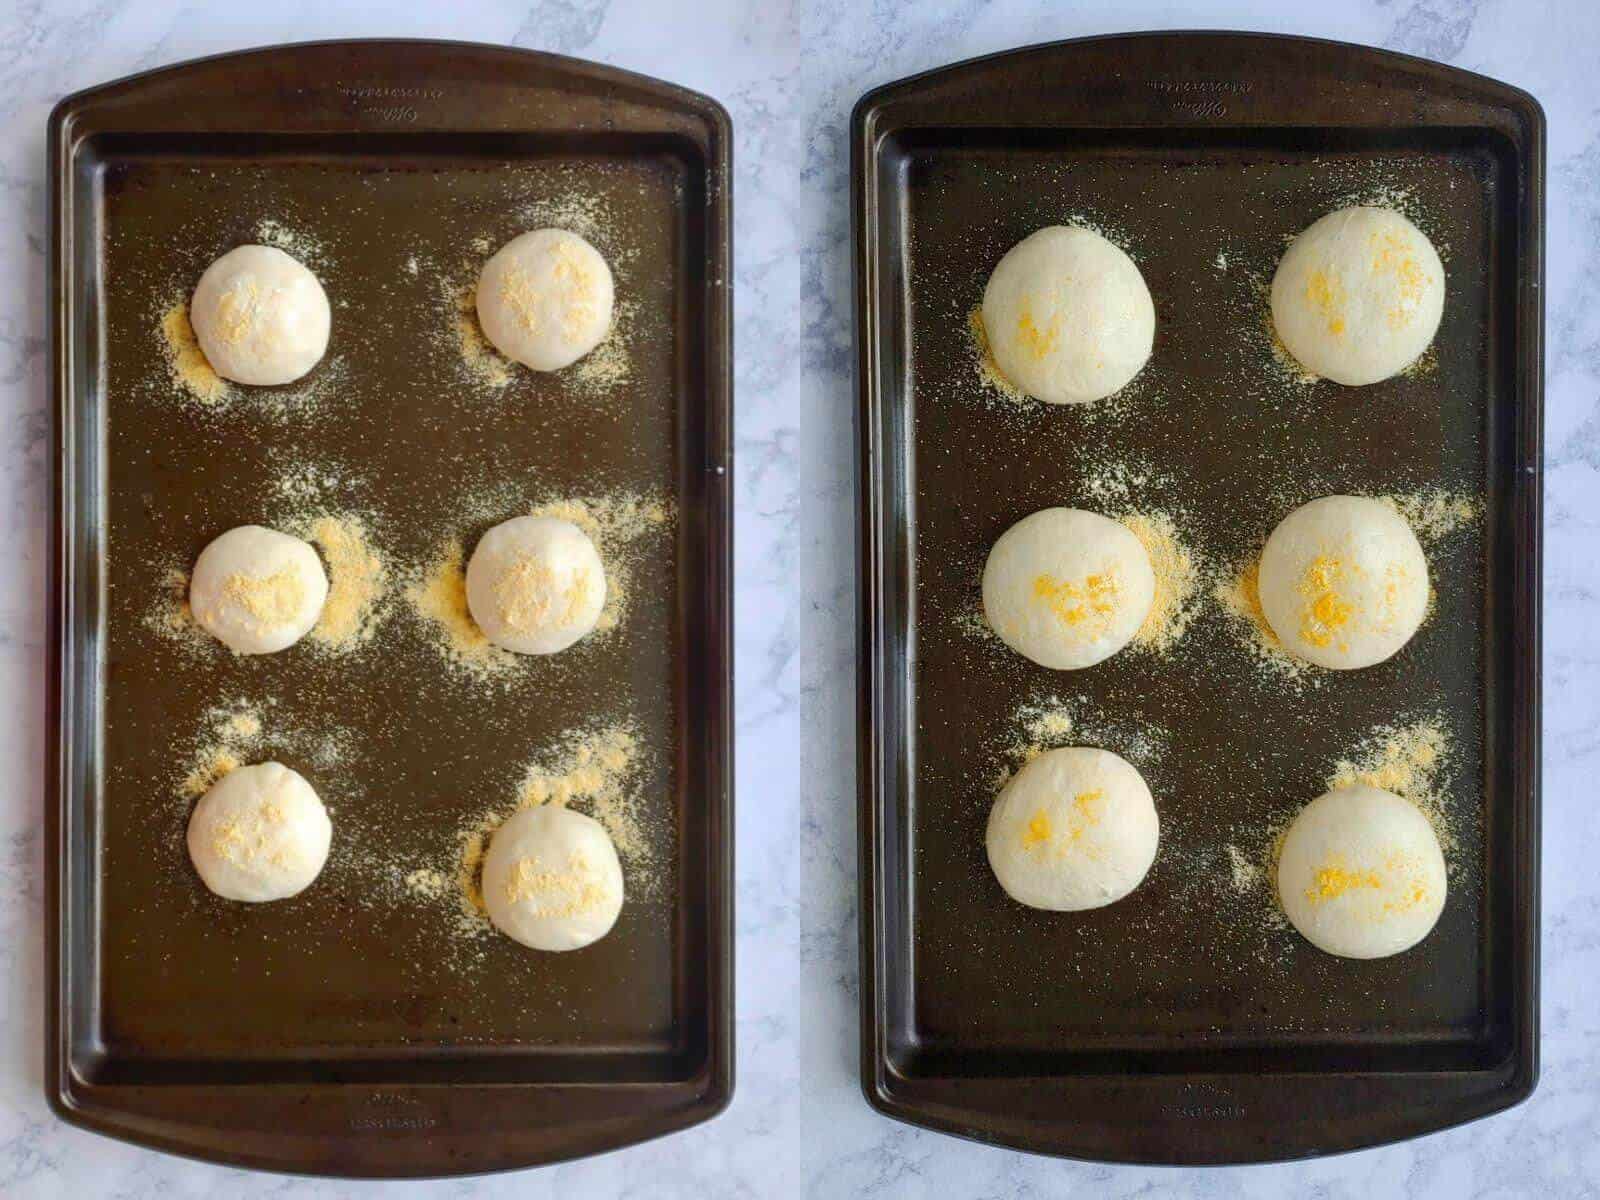 dough, shaped into balls, before and after its second rise